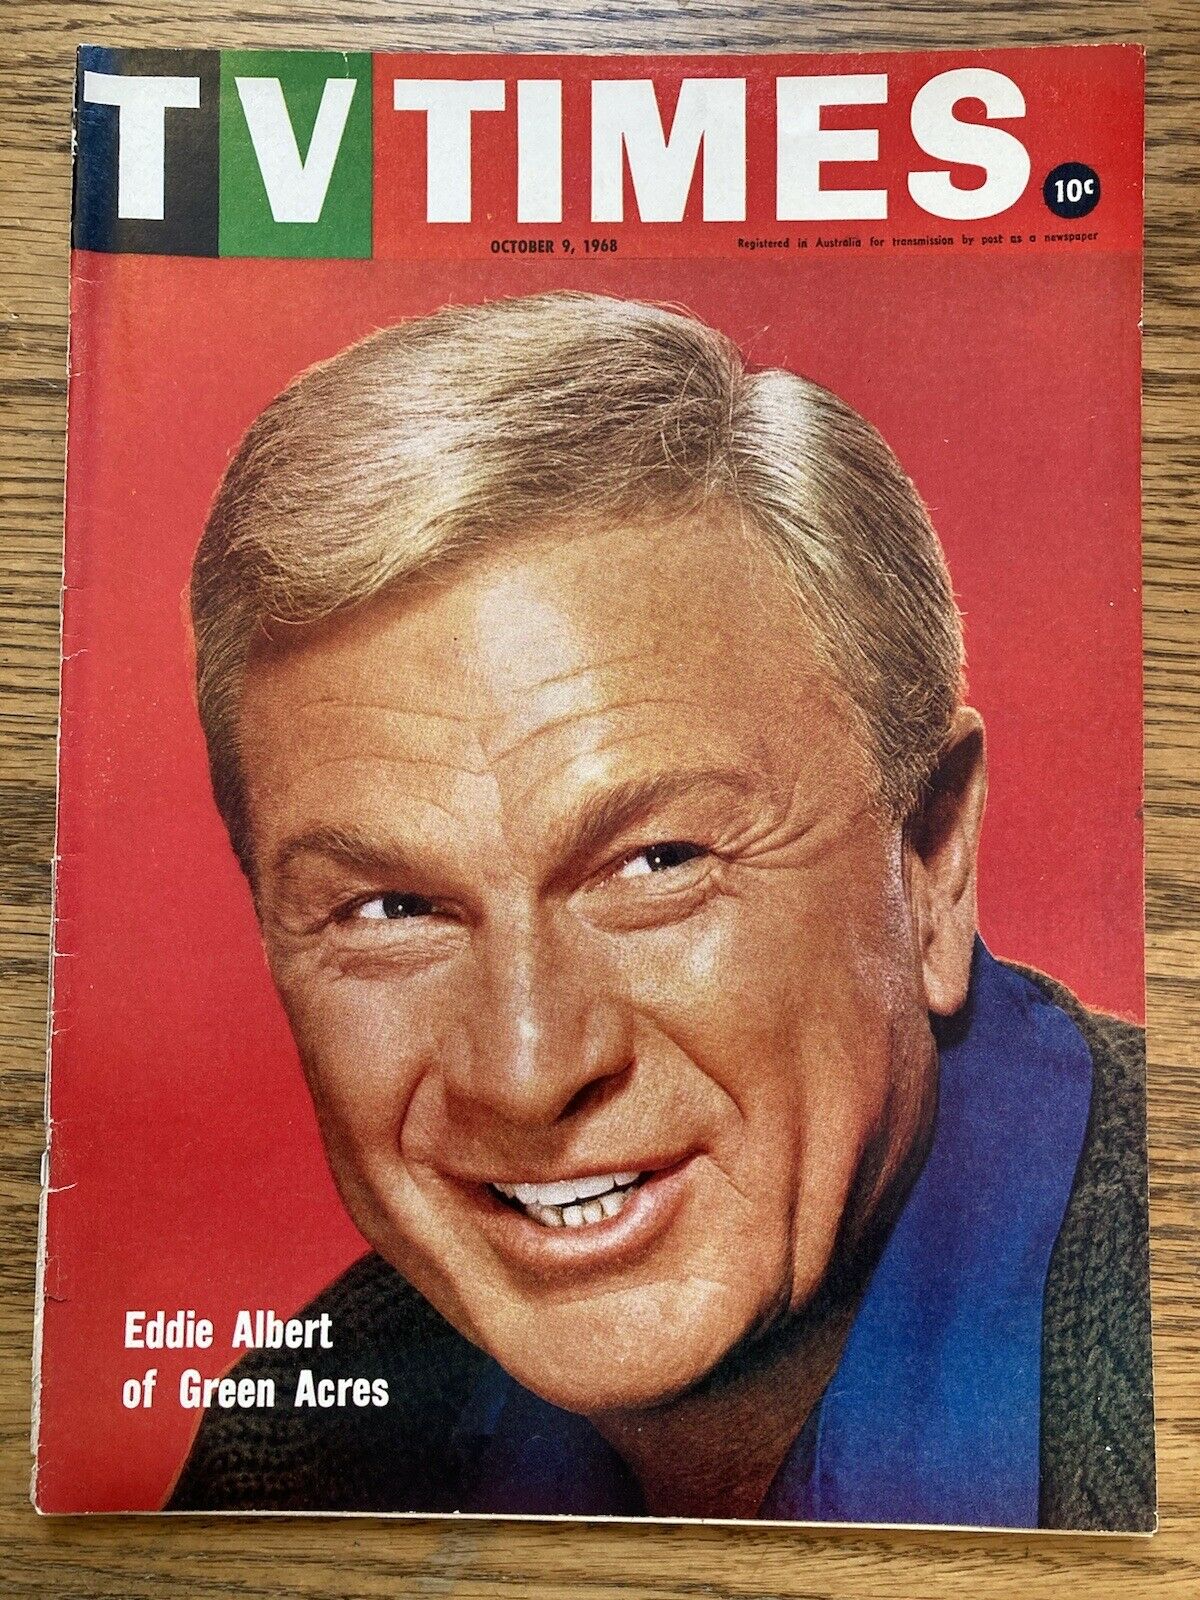 Eddie Albert on the cover of TV Times Magazine.